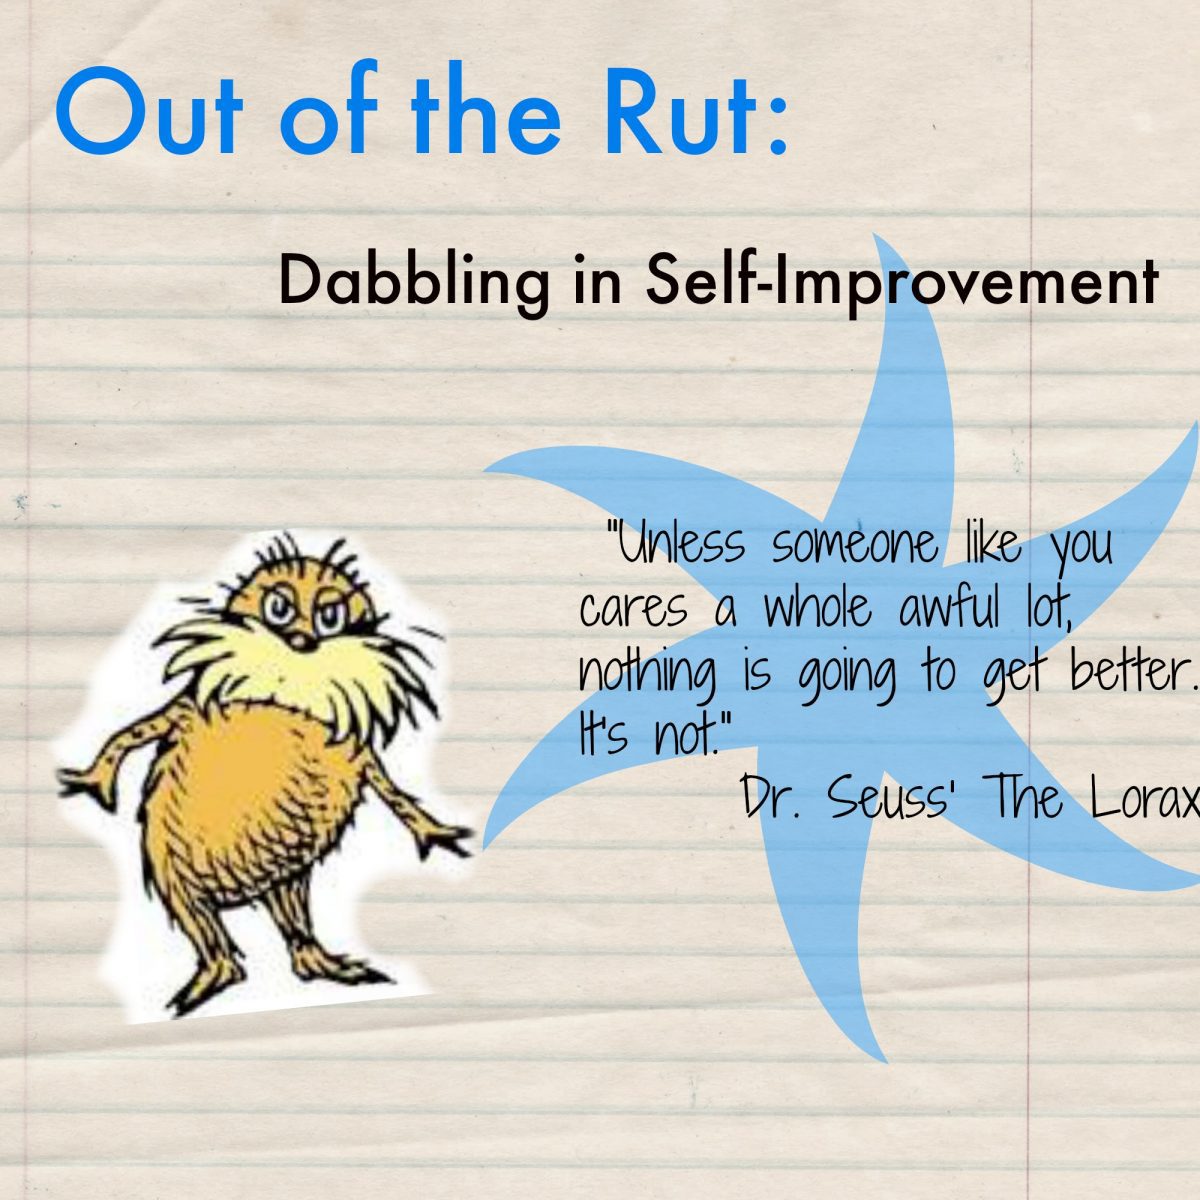 Out of the Rut: Getting Started